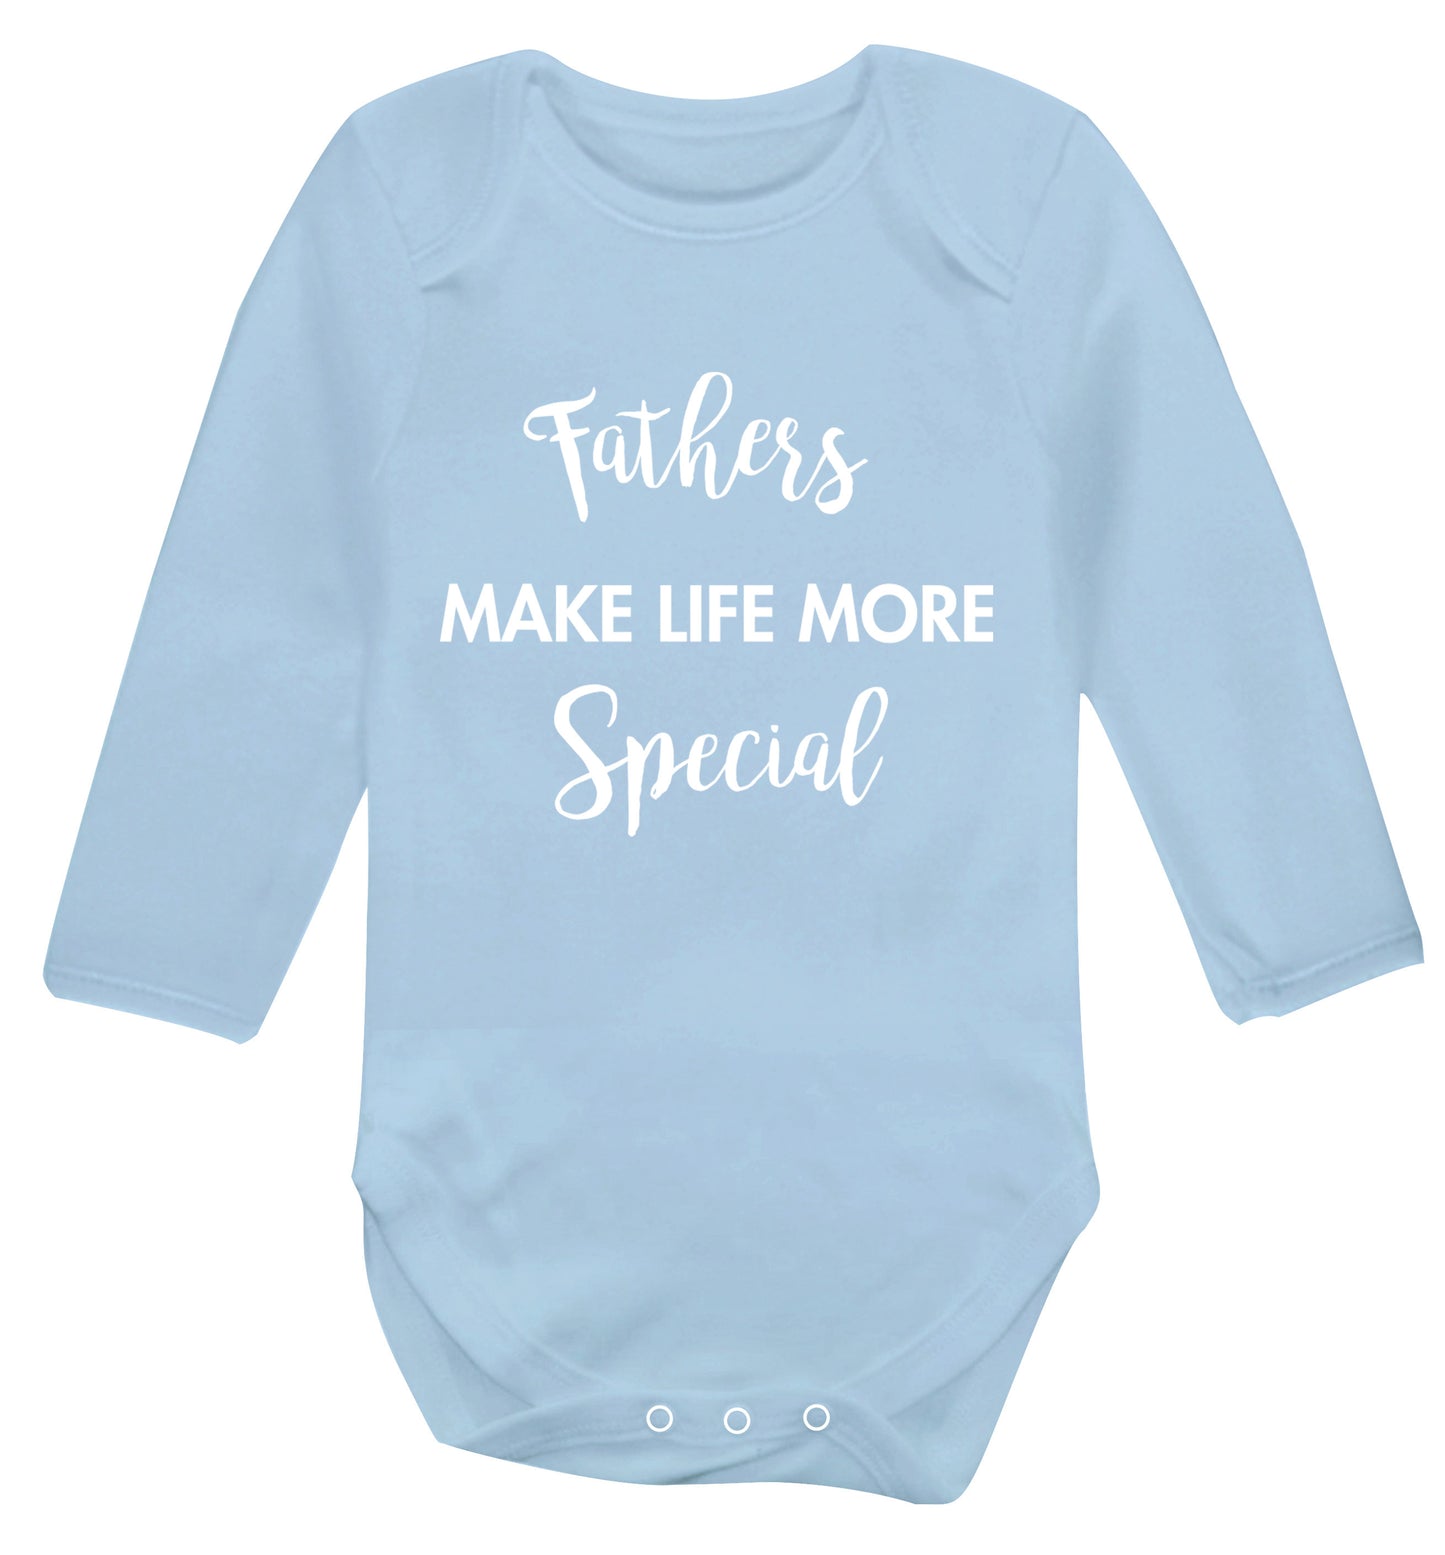 Fathers make life more special Baby Vest long sleeved pale blue 6-12 months